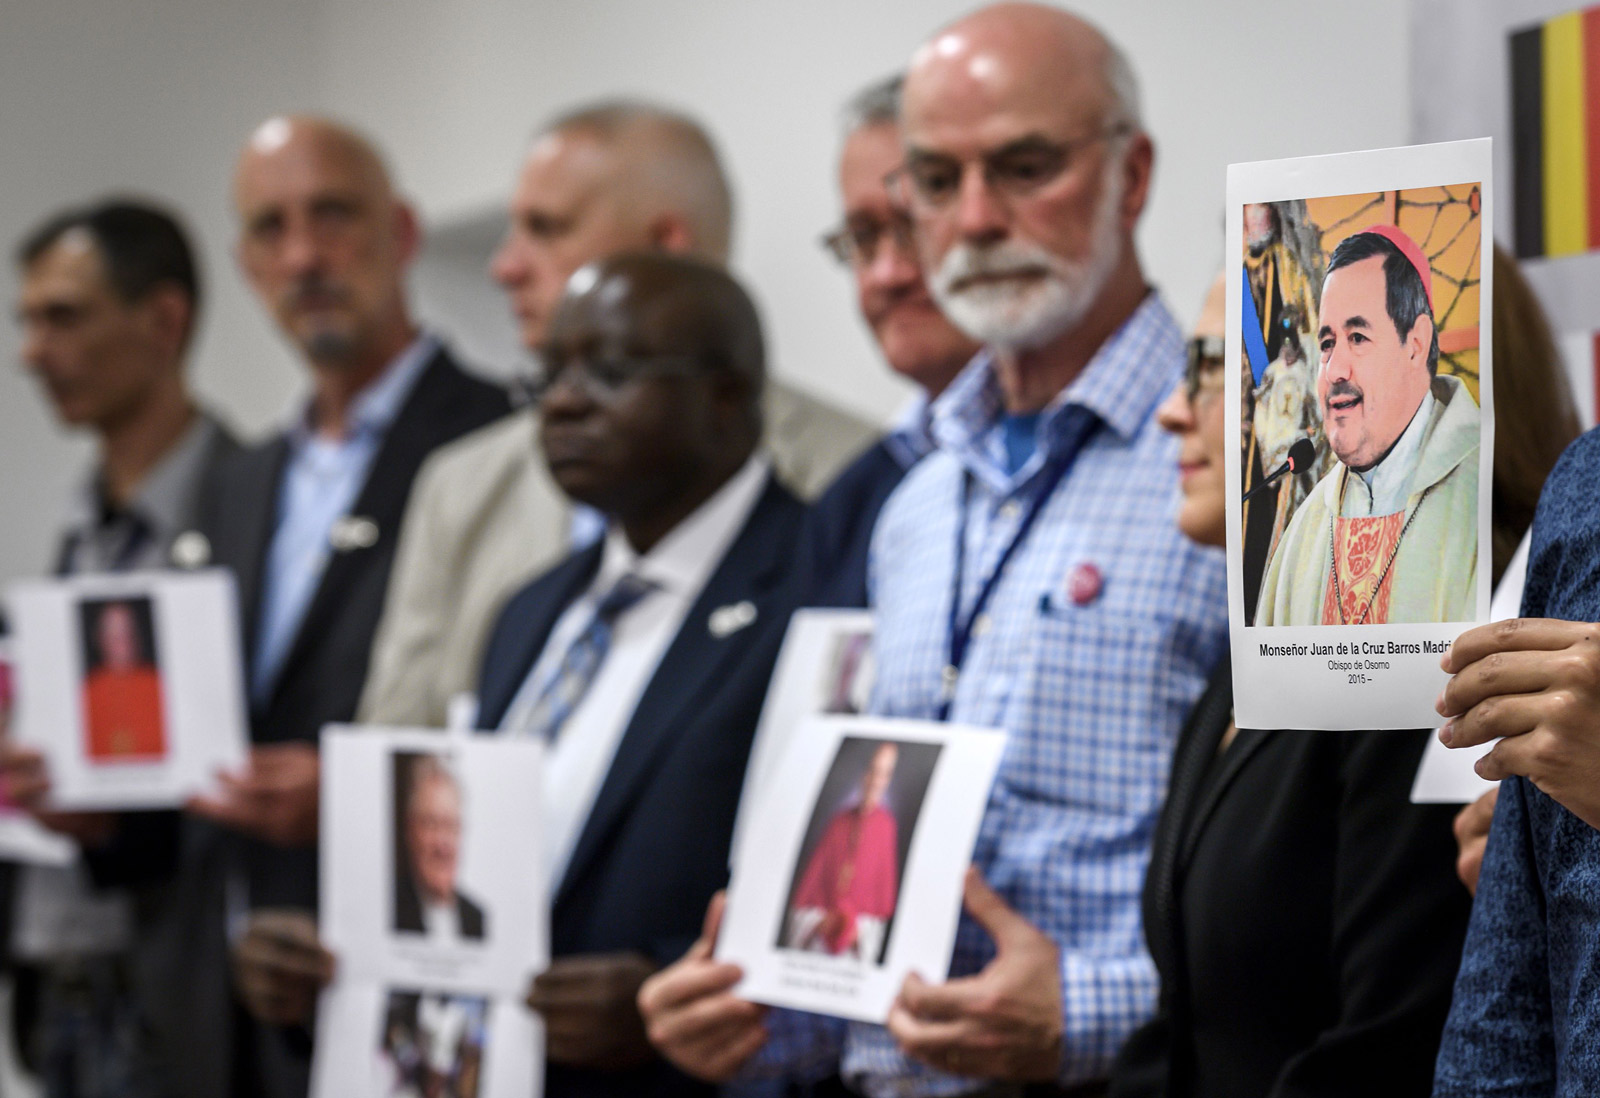 Survivors and activists of Ending Clergy Abuse, a new international organization against the child sexual abuse in the Catholic Church, Geneva, Switzerland, June 7, 2018